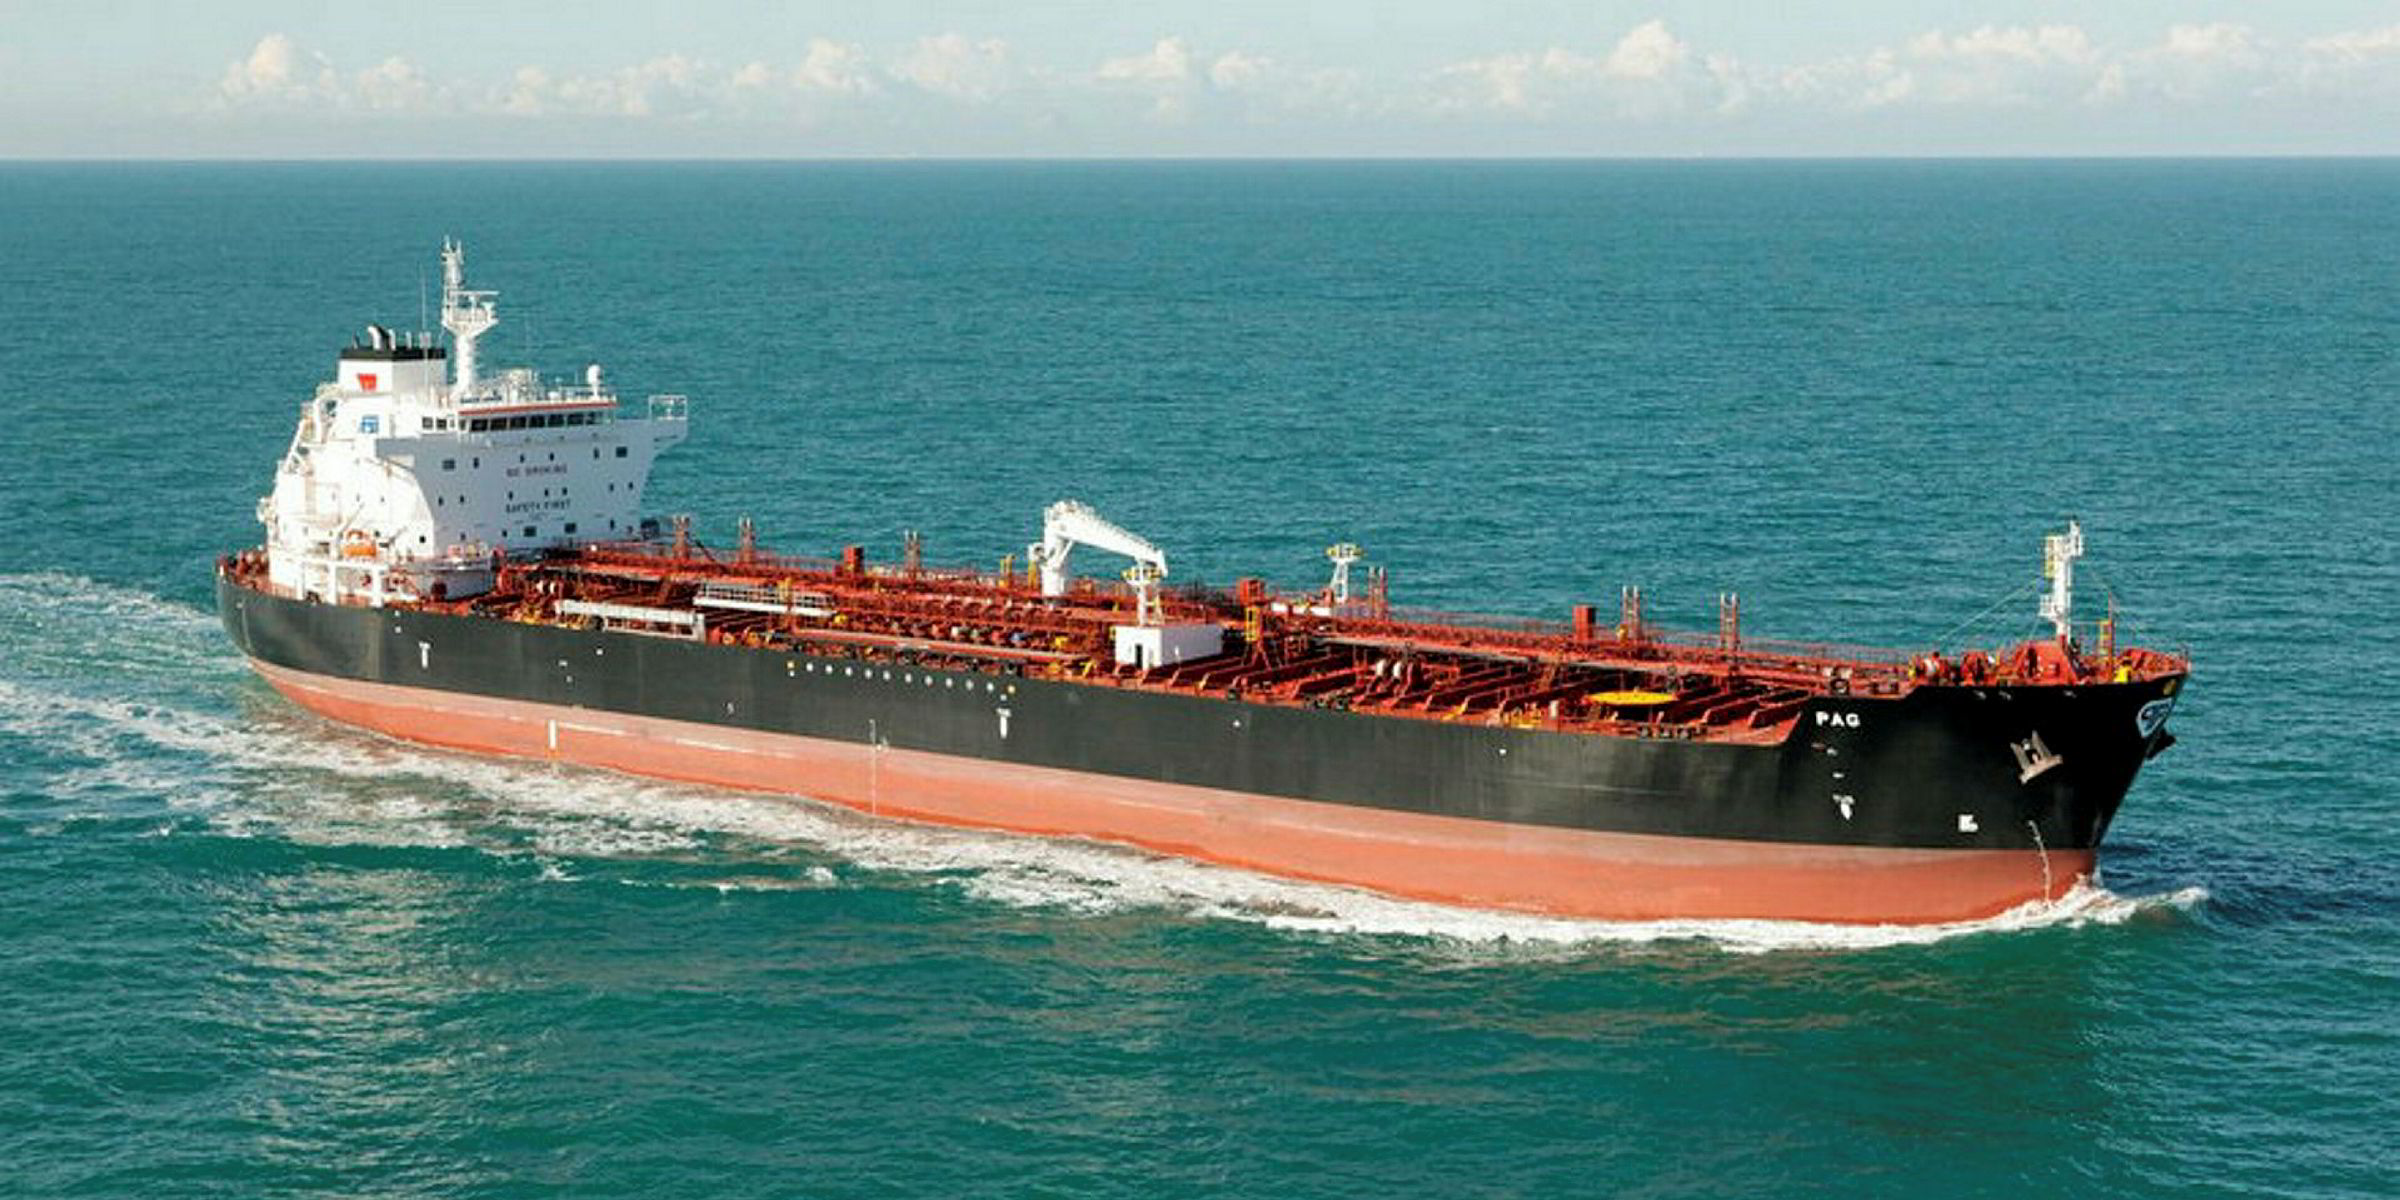 TNG fixes out MR tanker for a year | TradeWinds